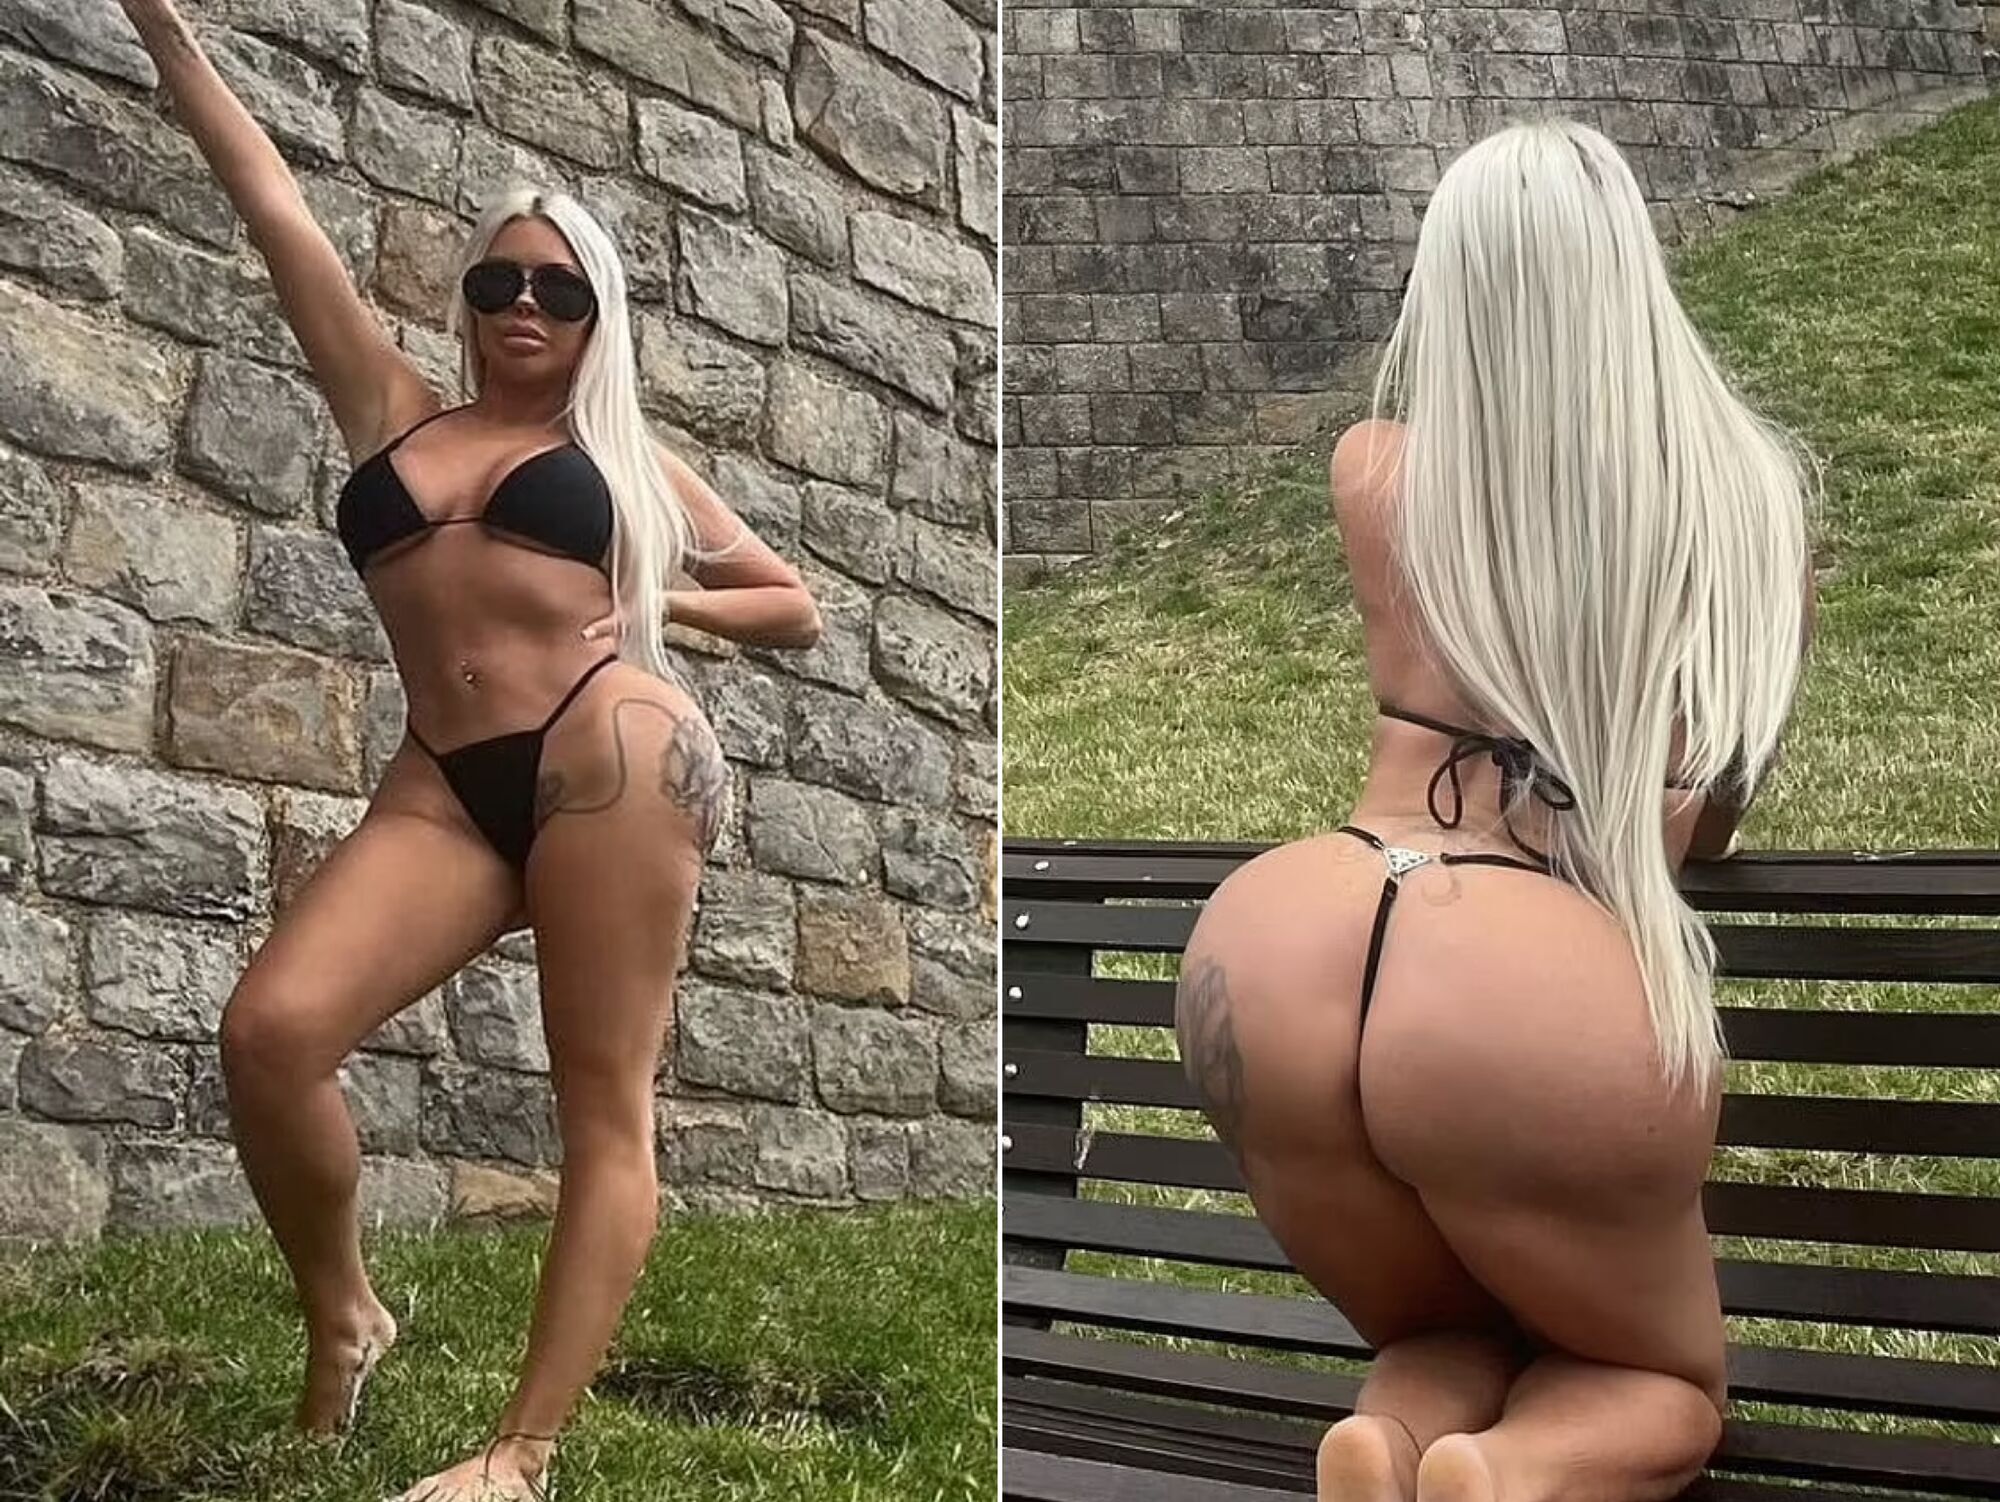 OnlyFans model staged a nude photo shoot near Windsor Castle: she was caught by police